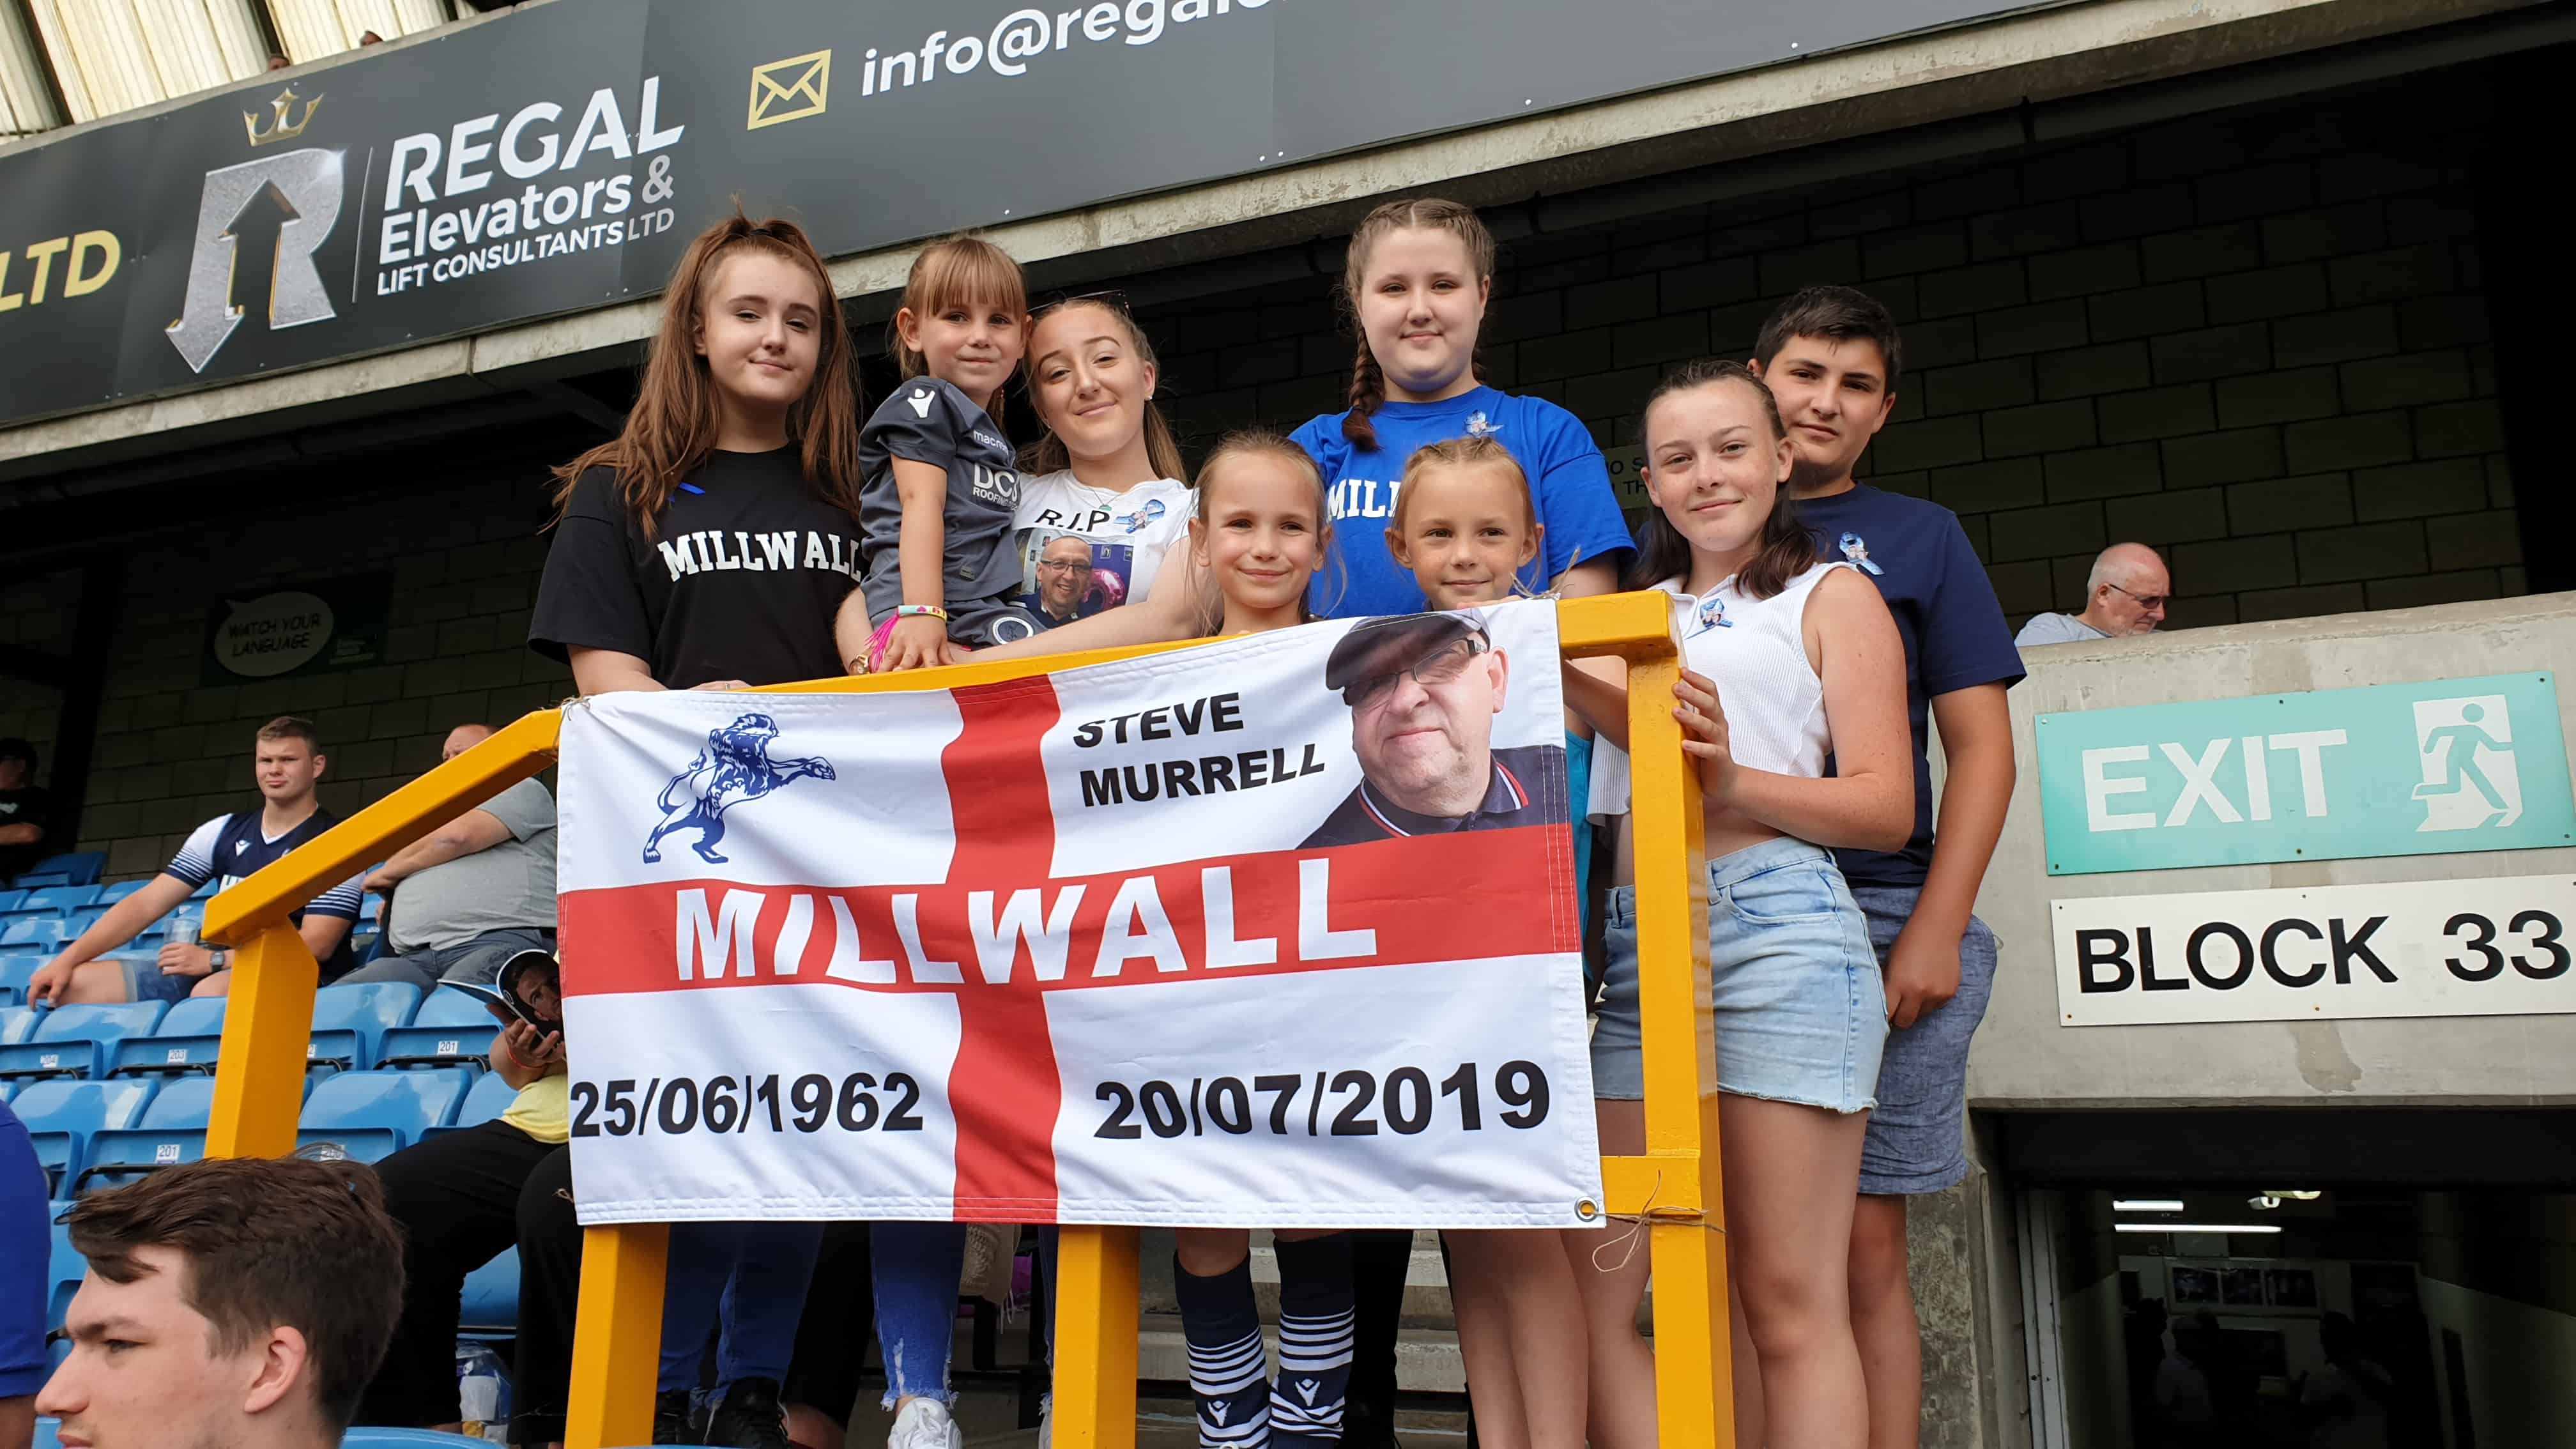 Maisie with all her cousins at the Millwall v Preston game on Saturday